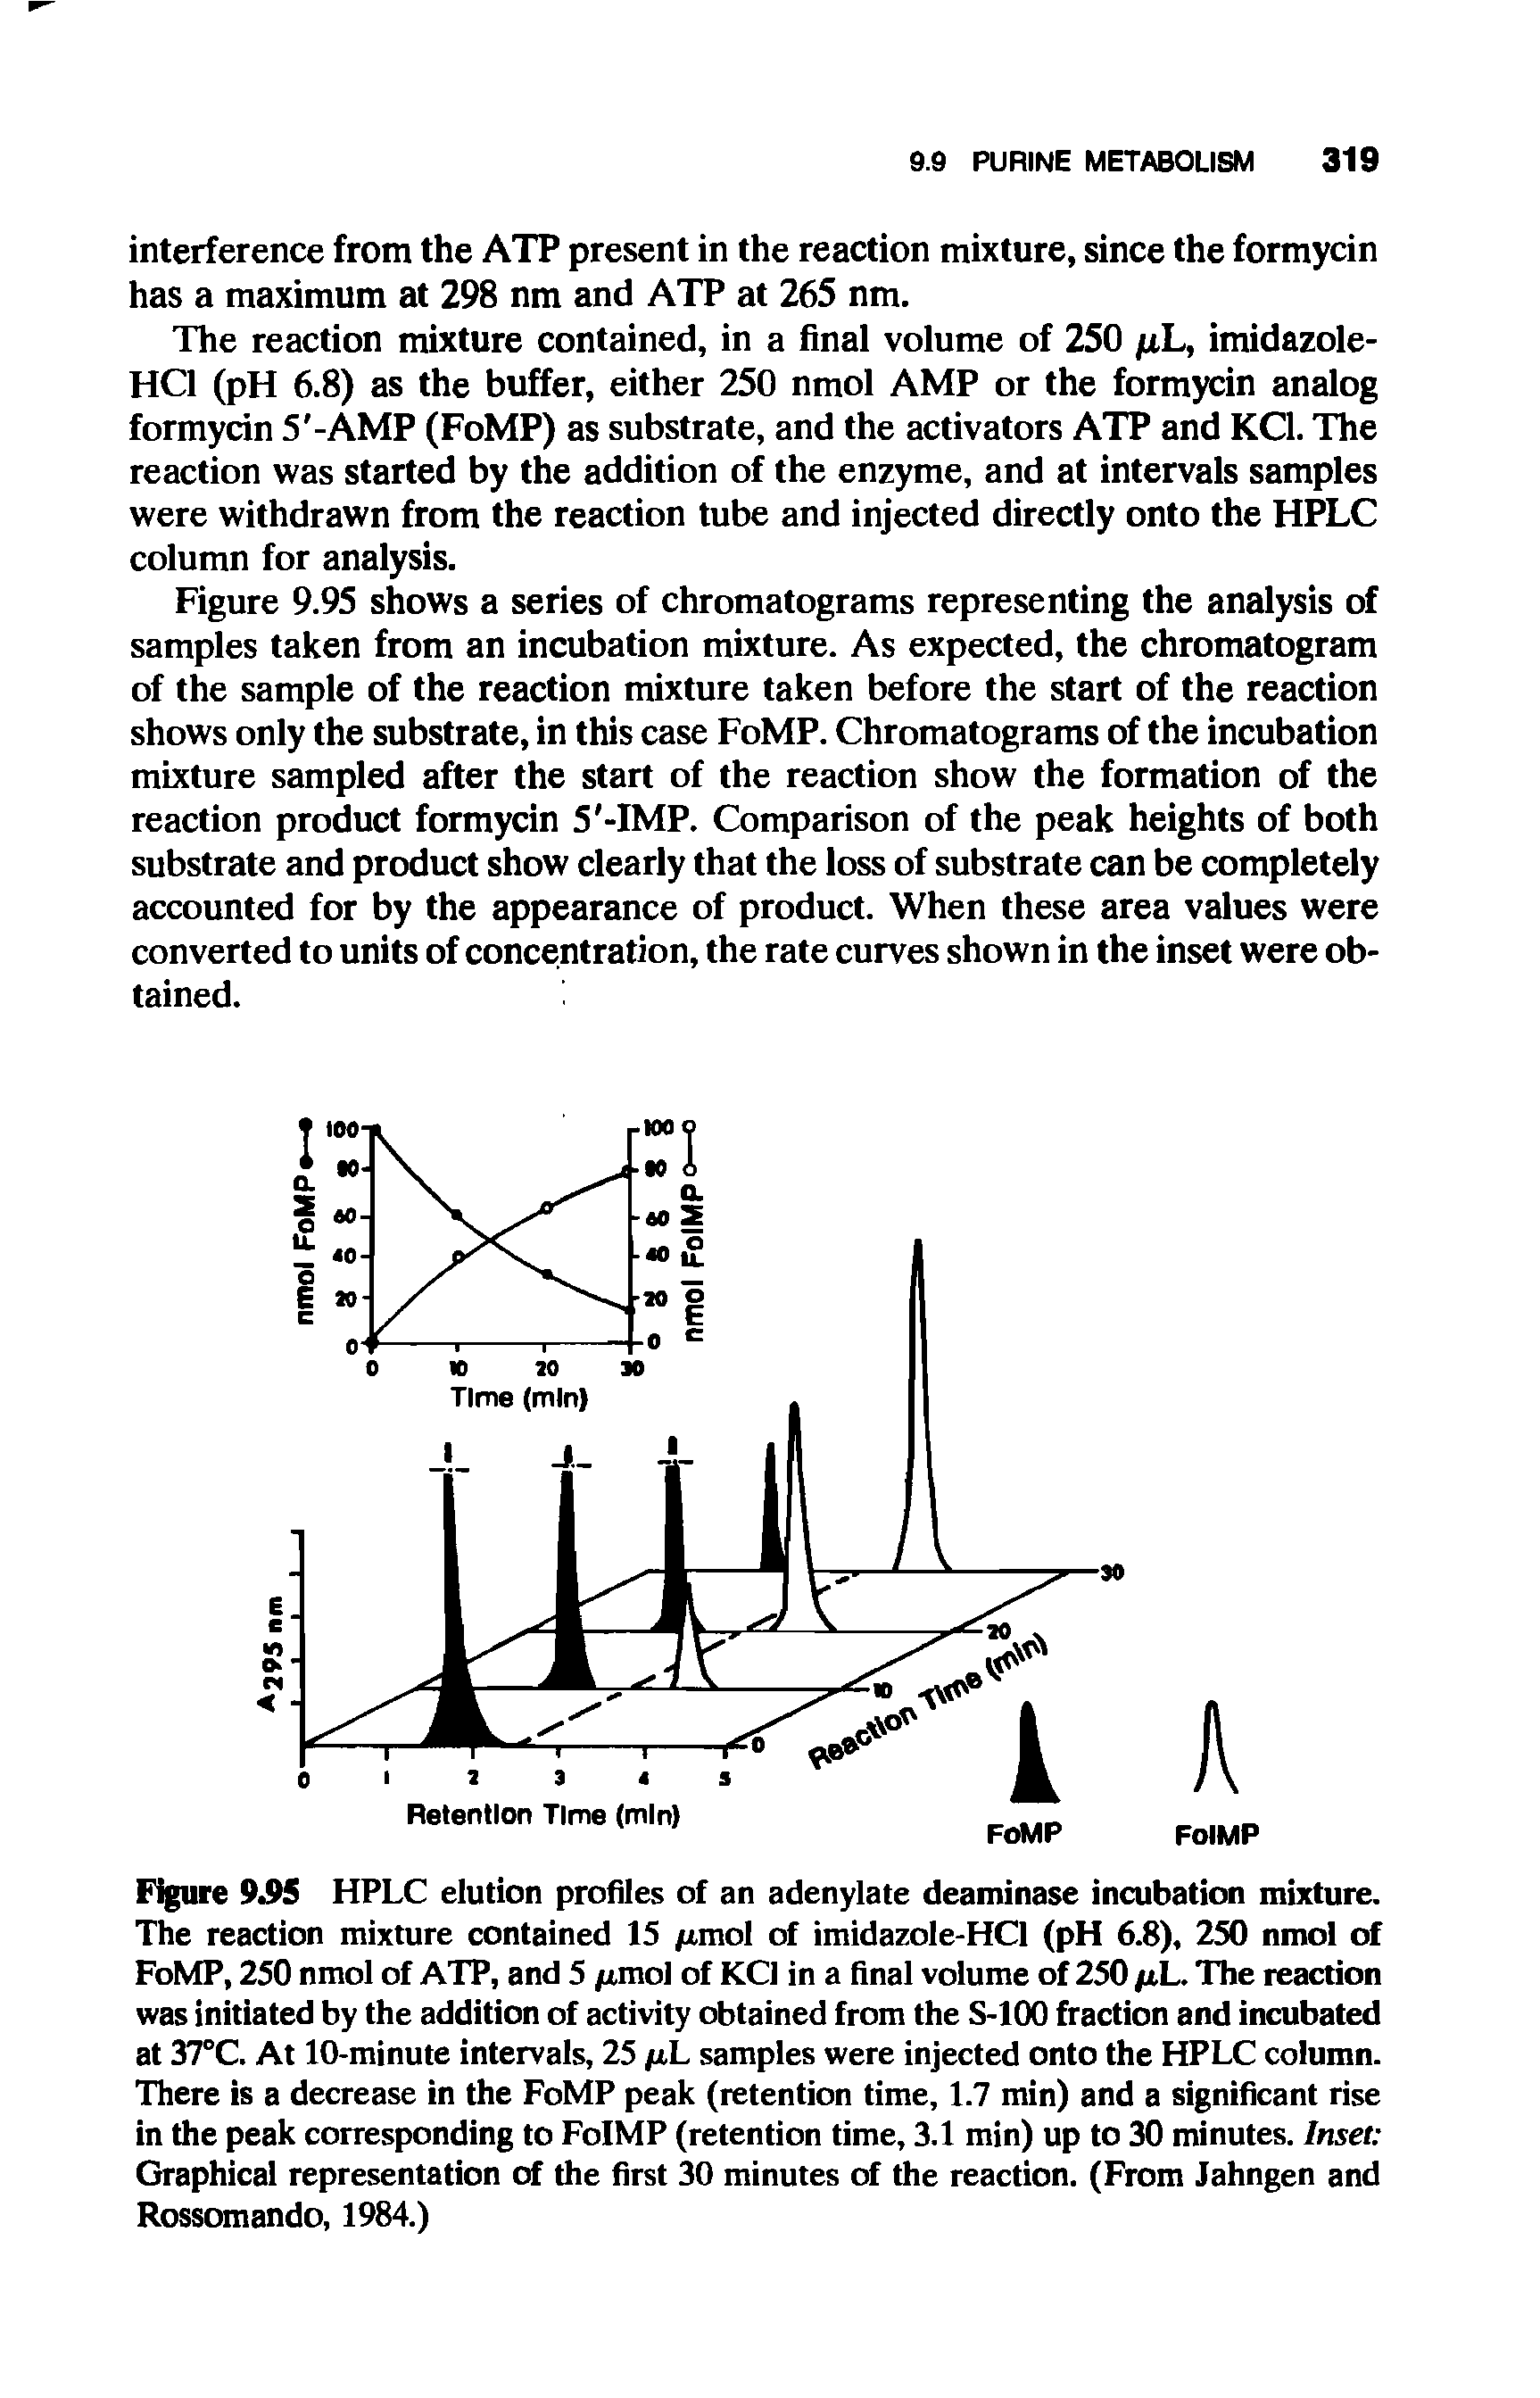 Figure 9.95 HPLC elution profiles of an adenylate deaminase incubation mixture. The reaction mixture contained 15 /xmol of imidazole-HCl (pH 6.8), 250 nmol of FoMP, 250 nmol of ATP, and 5 /u,mol of KCl in a final volume of 250 fiL. The reaction was initiated by the addition of activity obtained from the S-100 fraction and incubated at 37°C. At 10-minute intervals, 25 fiL samples were injected onto the HPLC column. There is a decrease in the FoMP peak (retention time, 1.7 min) and a significant rise in the peak corresponding to FoIMP (retention time, 3.1 min) up to 30 minutes. Inset Graphical representation of the first 30 minutes of the reaction. (From Jahngen and Rossomando, 1984.)...